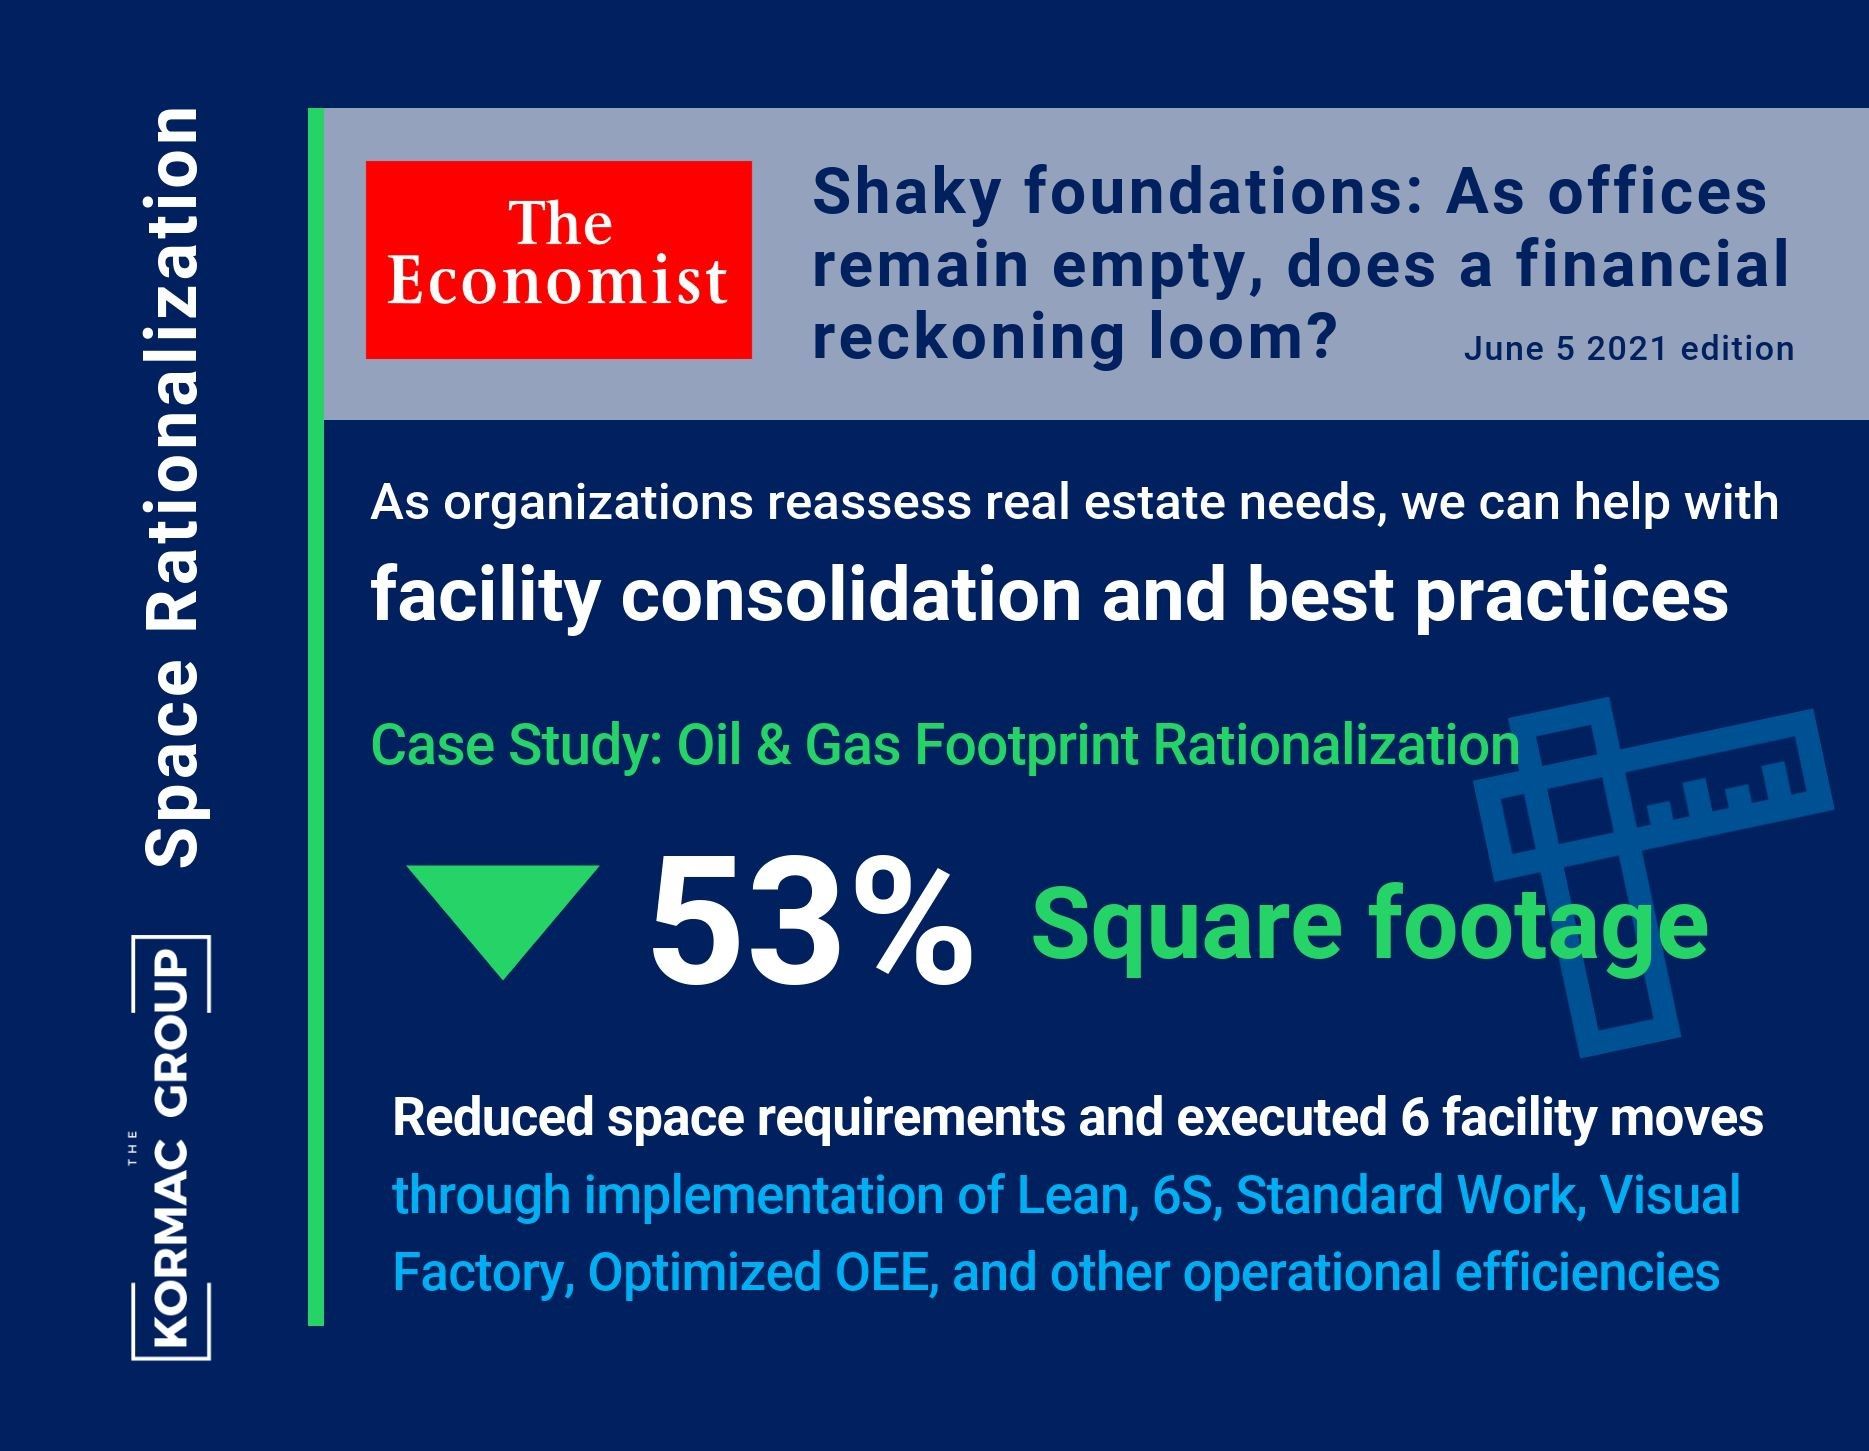 Space Rationalization The Economist - Shaky foundations: As offices remain empty, does a financial reckoning loom? June 5 2021 edition As organizations reasses real estate needs, we can help with facility consolidation and best practices Case study: Oil & Gas Footprint Rationalization -53% Square footage Reduced space requirements and executed 6 facility moves through implementation of Lean, 6S, Standard Work, Visual Factory, Optimized OEE, and other operational efficiencies